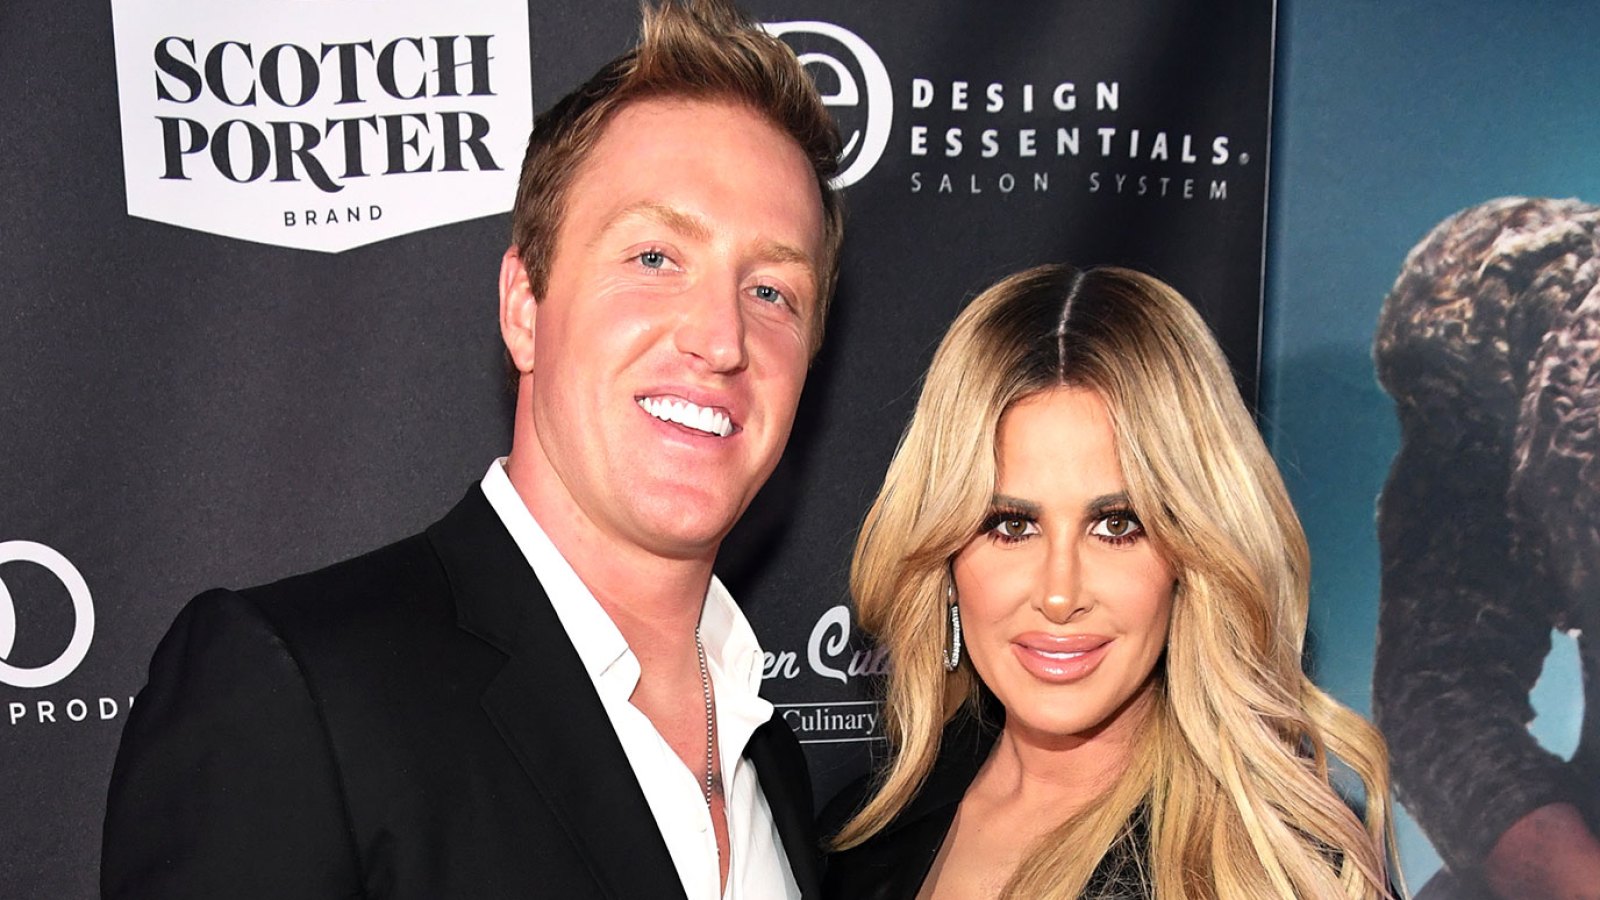 Kim Zolciak Poses Nude, Wearing Nothing But a Giant Hat in Sexy Photo Taken by Husband Kroy